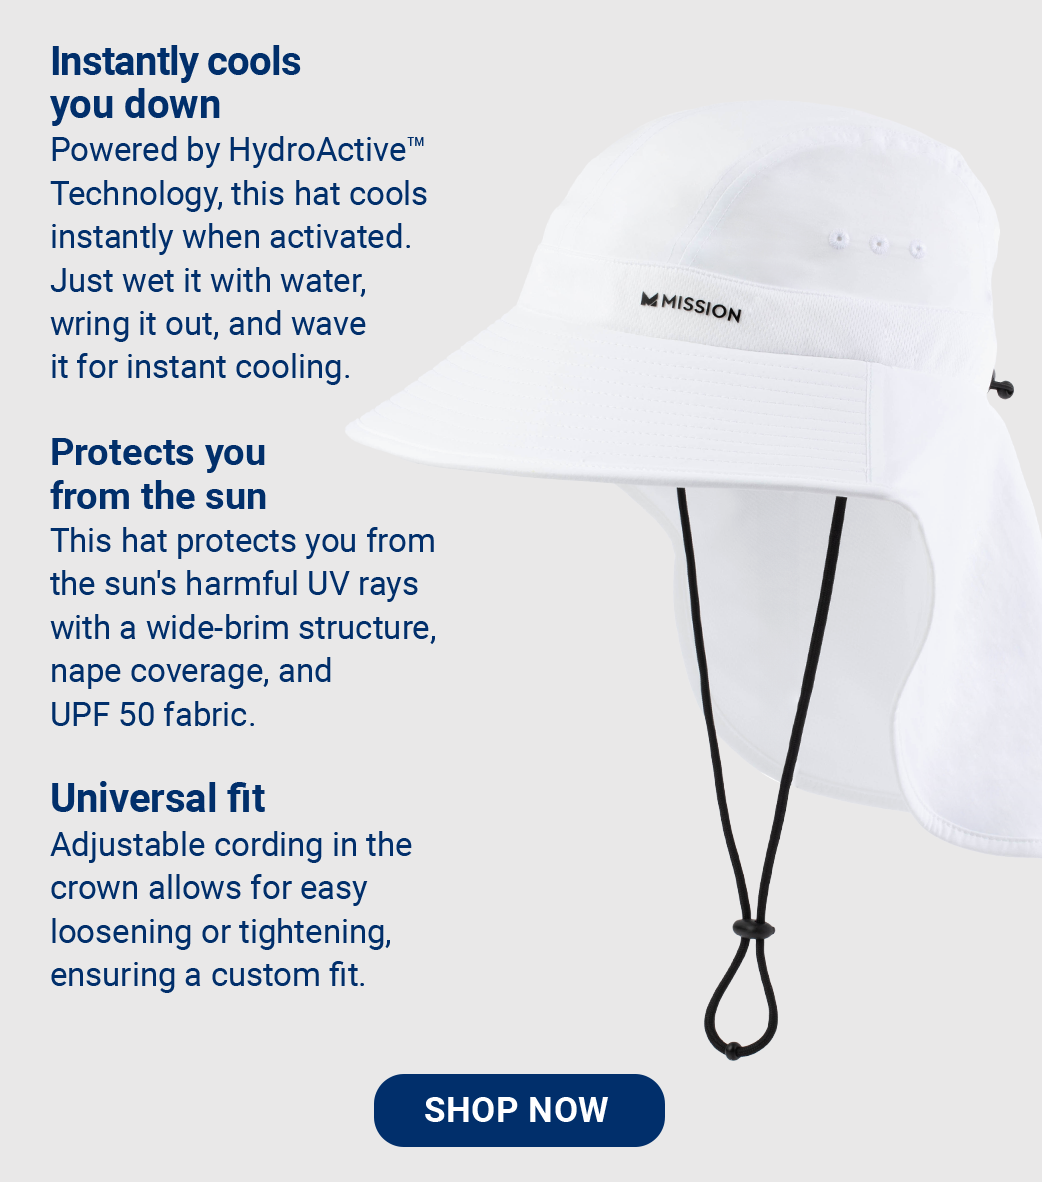 Instantly cools you down Powered by HydroActive™ Technology, this hat cools instantly when activated. Just wet it with water, wring it out, and wave it for instant cooling. Protects you from the sun This hat protects you from the sun's harmful UV rays with a wide-brim structure, nape coverage, and UPF 50 fabric. Universal fit Adjustable cording in the crown allows for easy loosening or tightening, ensuring a custom fit. [SHOP NOW]